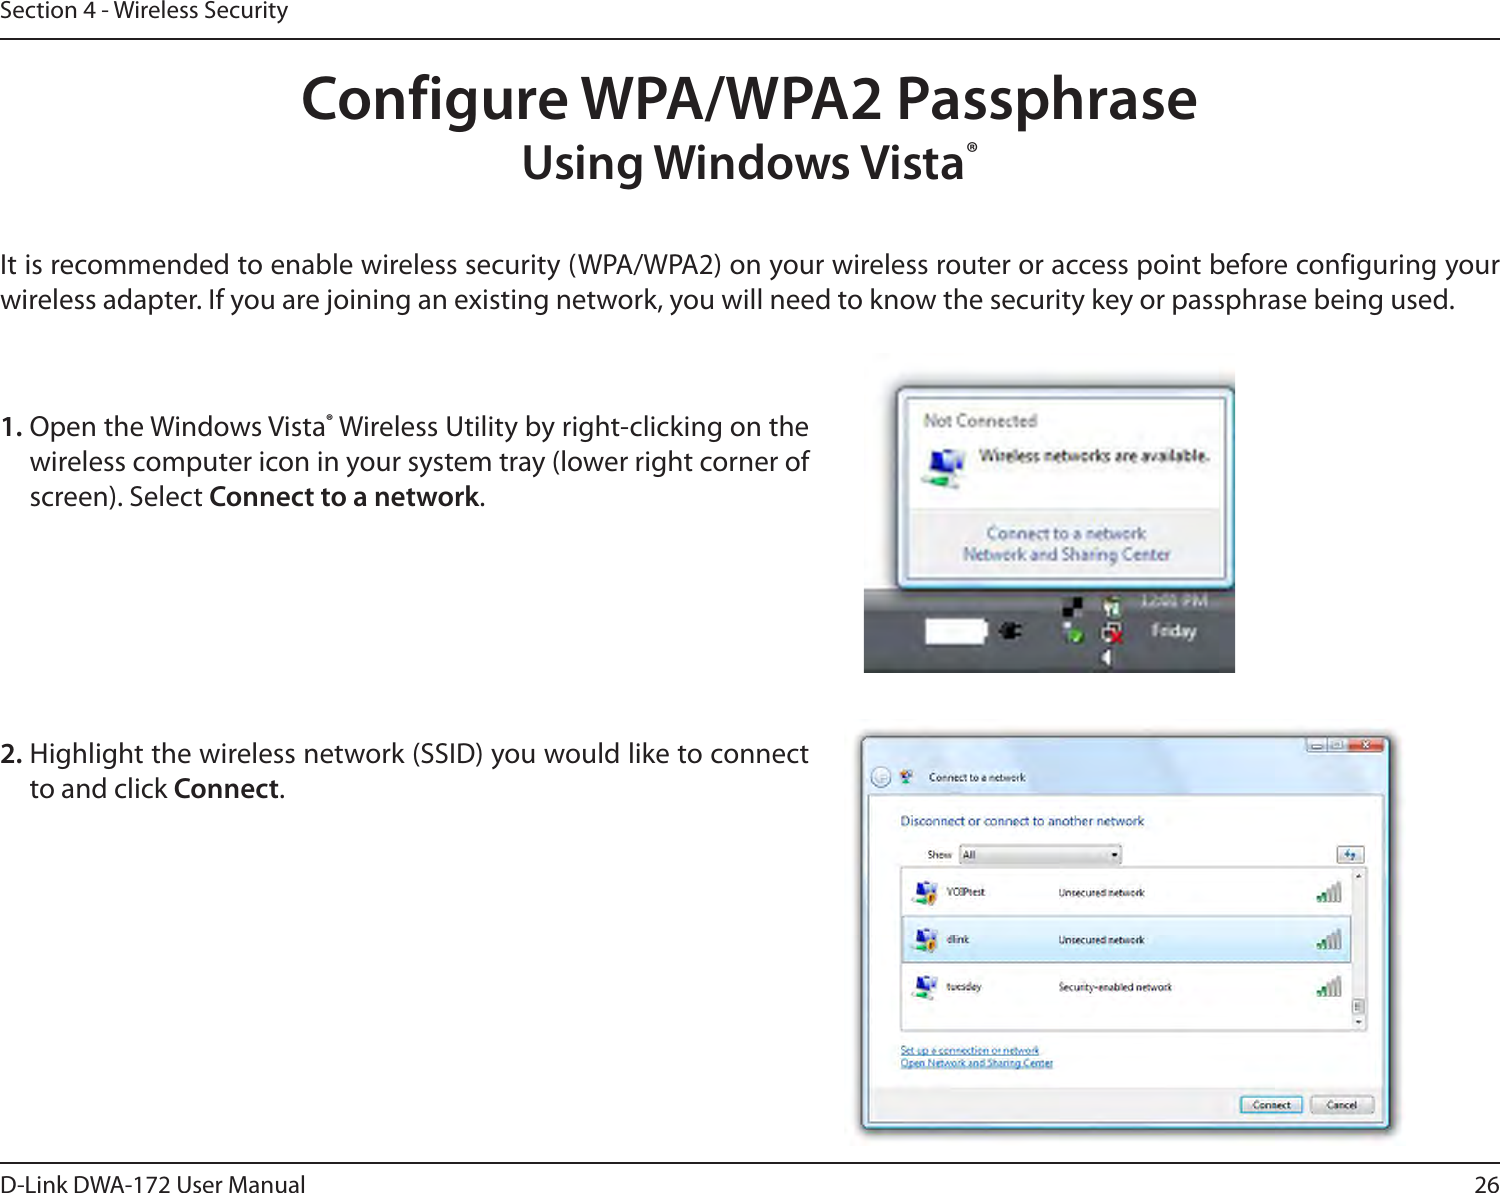 26D-Link DWA-172 User ManualSection 4 - Wireless SecurityConfigure WPA/WPA2 PassphraseUsing Windows Vista® It is recommended to enable wireless security (WPA/WPA2) on your wireless router or access point before configuring your wireless adapter. If you are joining an existing network, you will need to know the security key or passphrase being used.2. Highlight the wireless network (SSID) you would like to connect to and click Connect.1. Open the Windows Vista® Wireless Utility by right-clicking on the wireless computer icon in your system tray (lower right corner of screen). Select Connect to a network. 